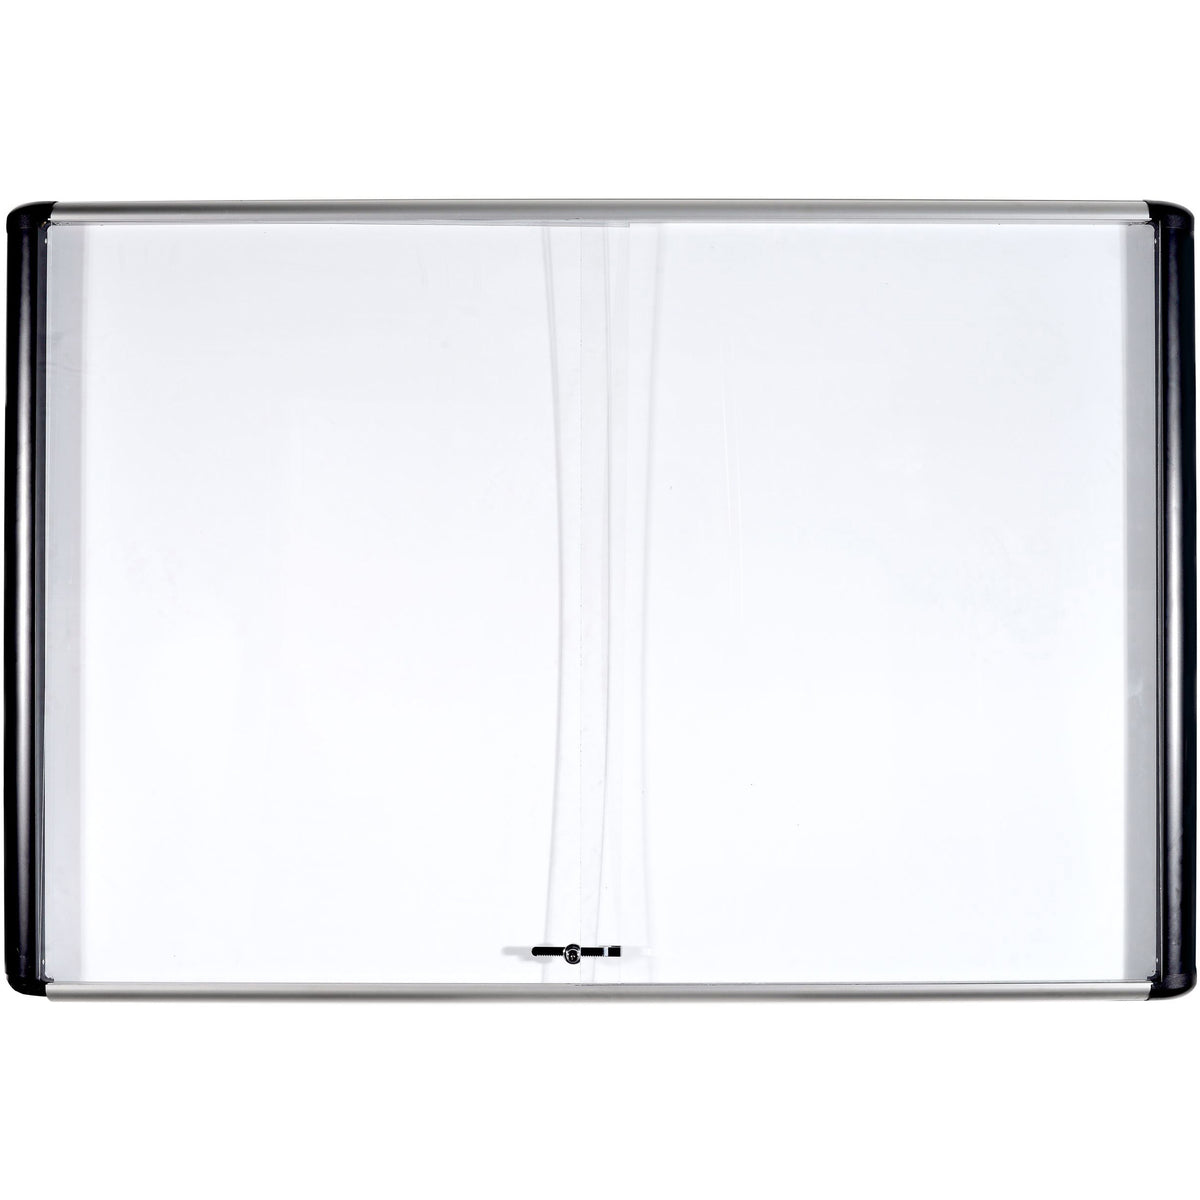 VT770109630 Enclosed Locking Sliding Doors Magnetic Dry Erase Board, Wall Mounting Commerial Whiteboard, 48" x 72", Aluminum Frame by MasterVision